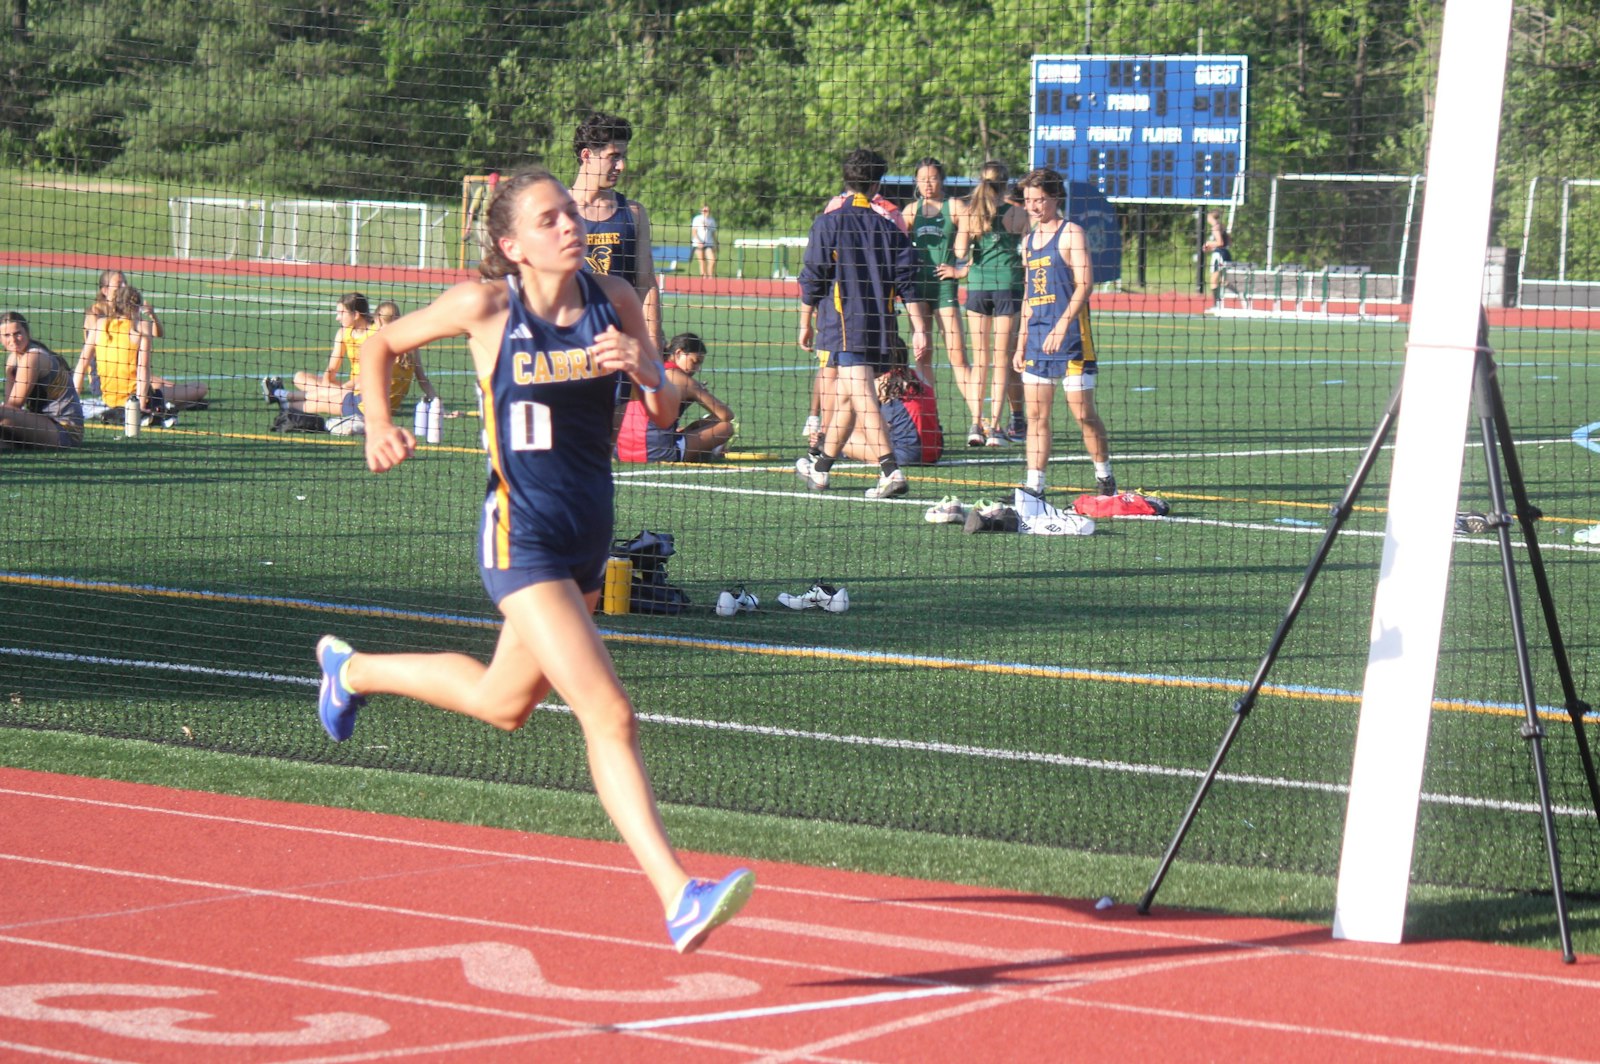 For the fourth year in a row, Allen Park Cabrini’s Ava Teed crosses the finish line first in the 3200 meter run. Teed also won the 800 and 1600, plus ran on the Monarchs’ winning 4x400 relay.